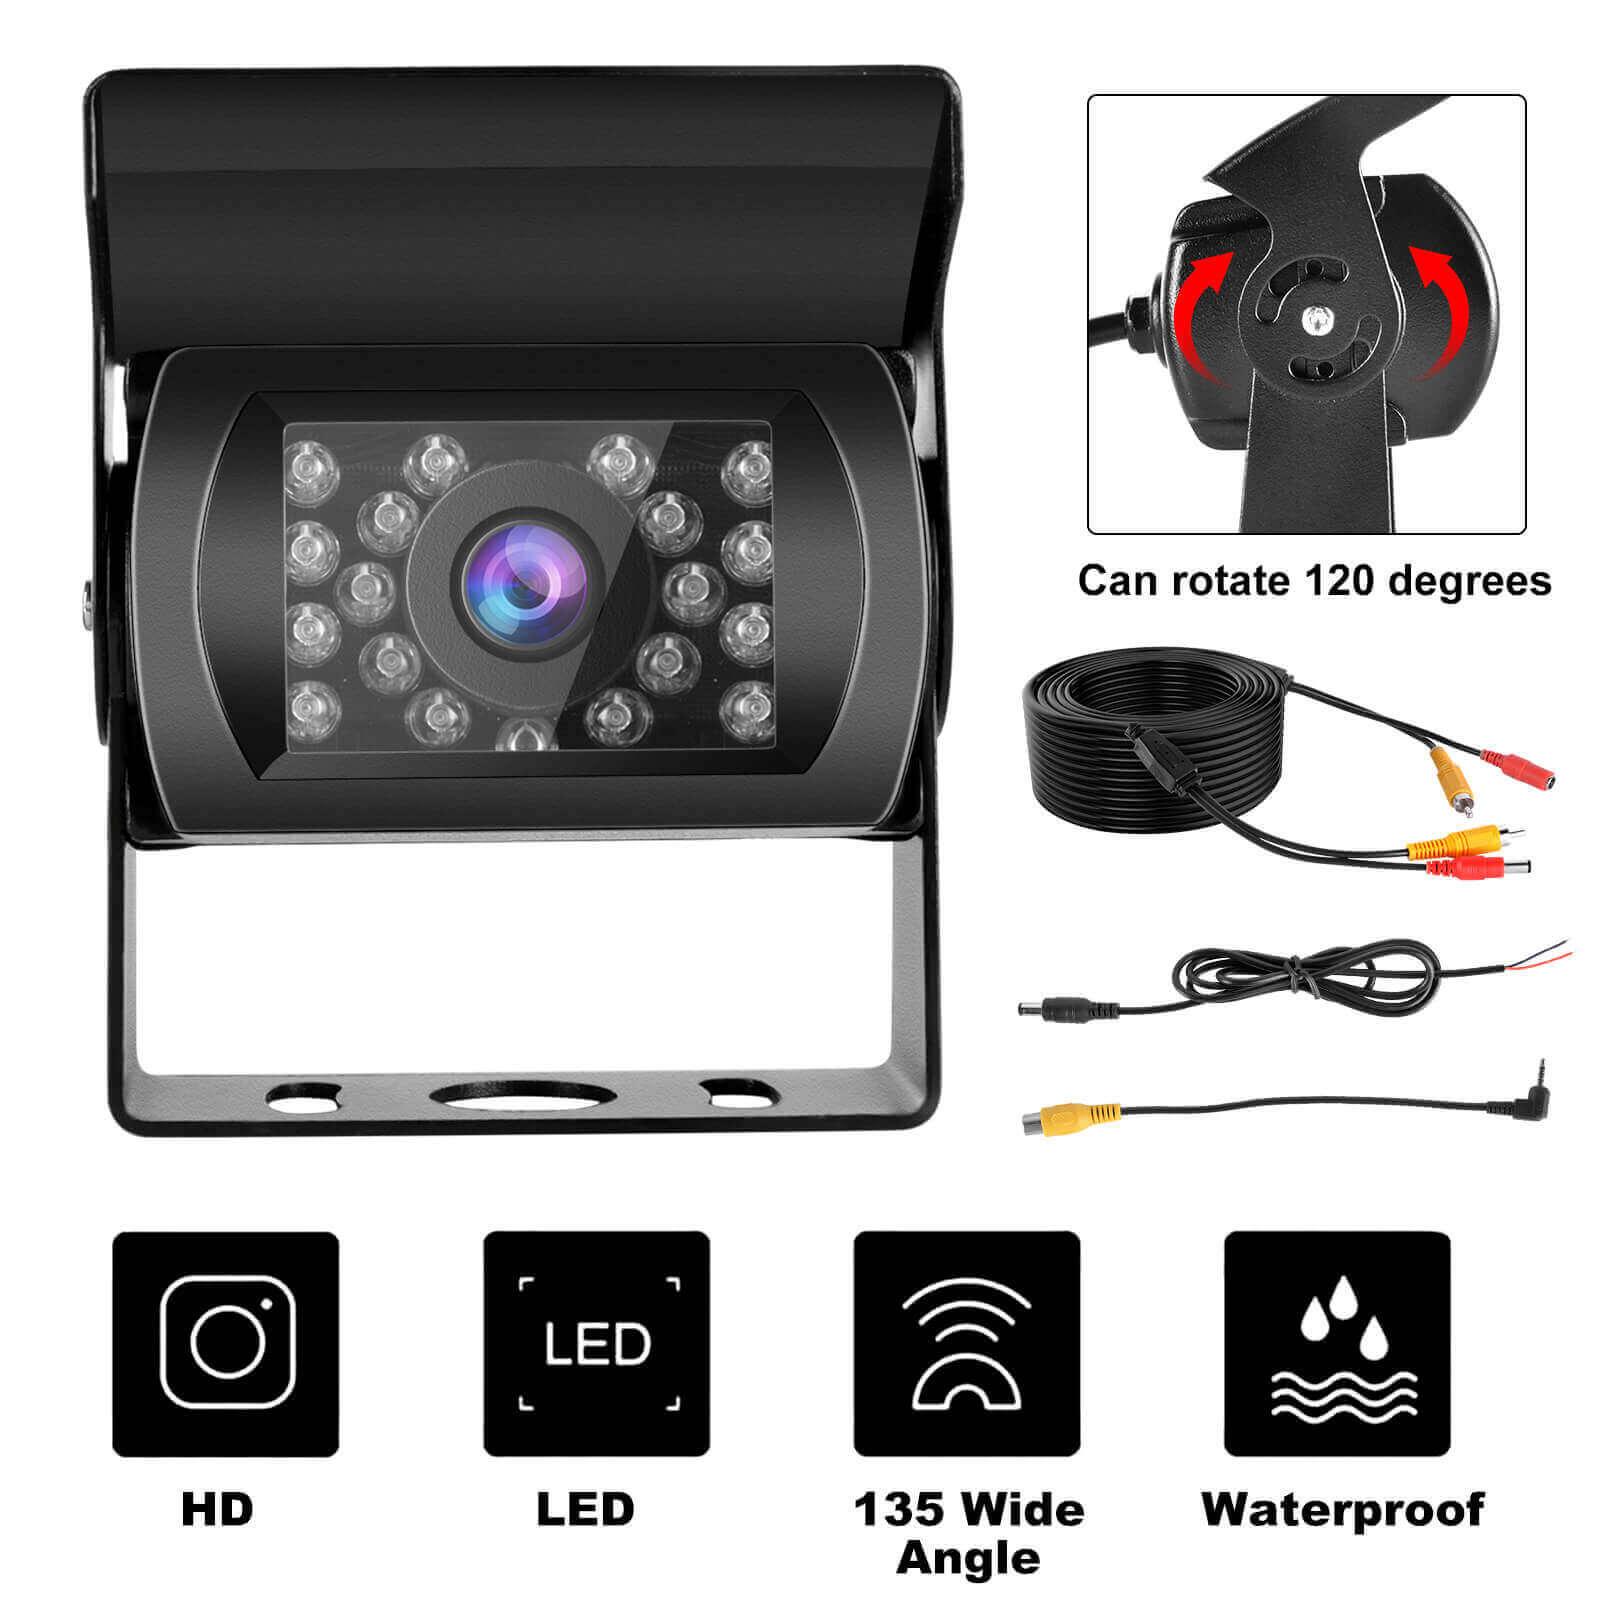 Cost-effective and Most worthwhile XGODY Back Up Camera For Truck, RV, Bus, lorry, large vehicle, 20m / 66ft HD Reverse Camera With Night Vision, Waterproof - XGODY 